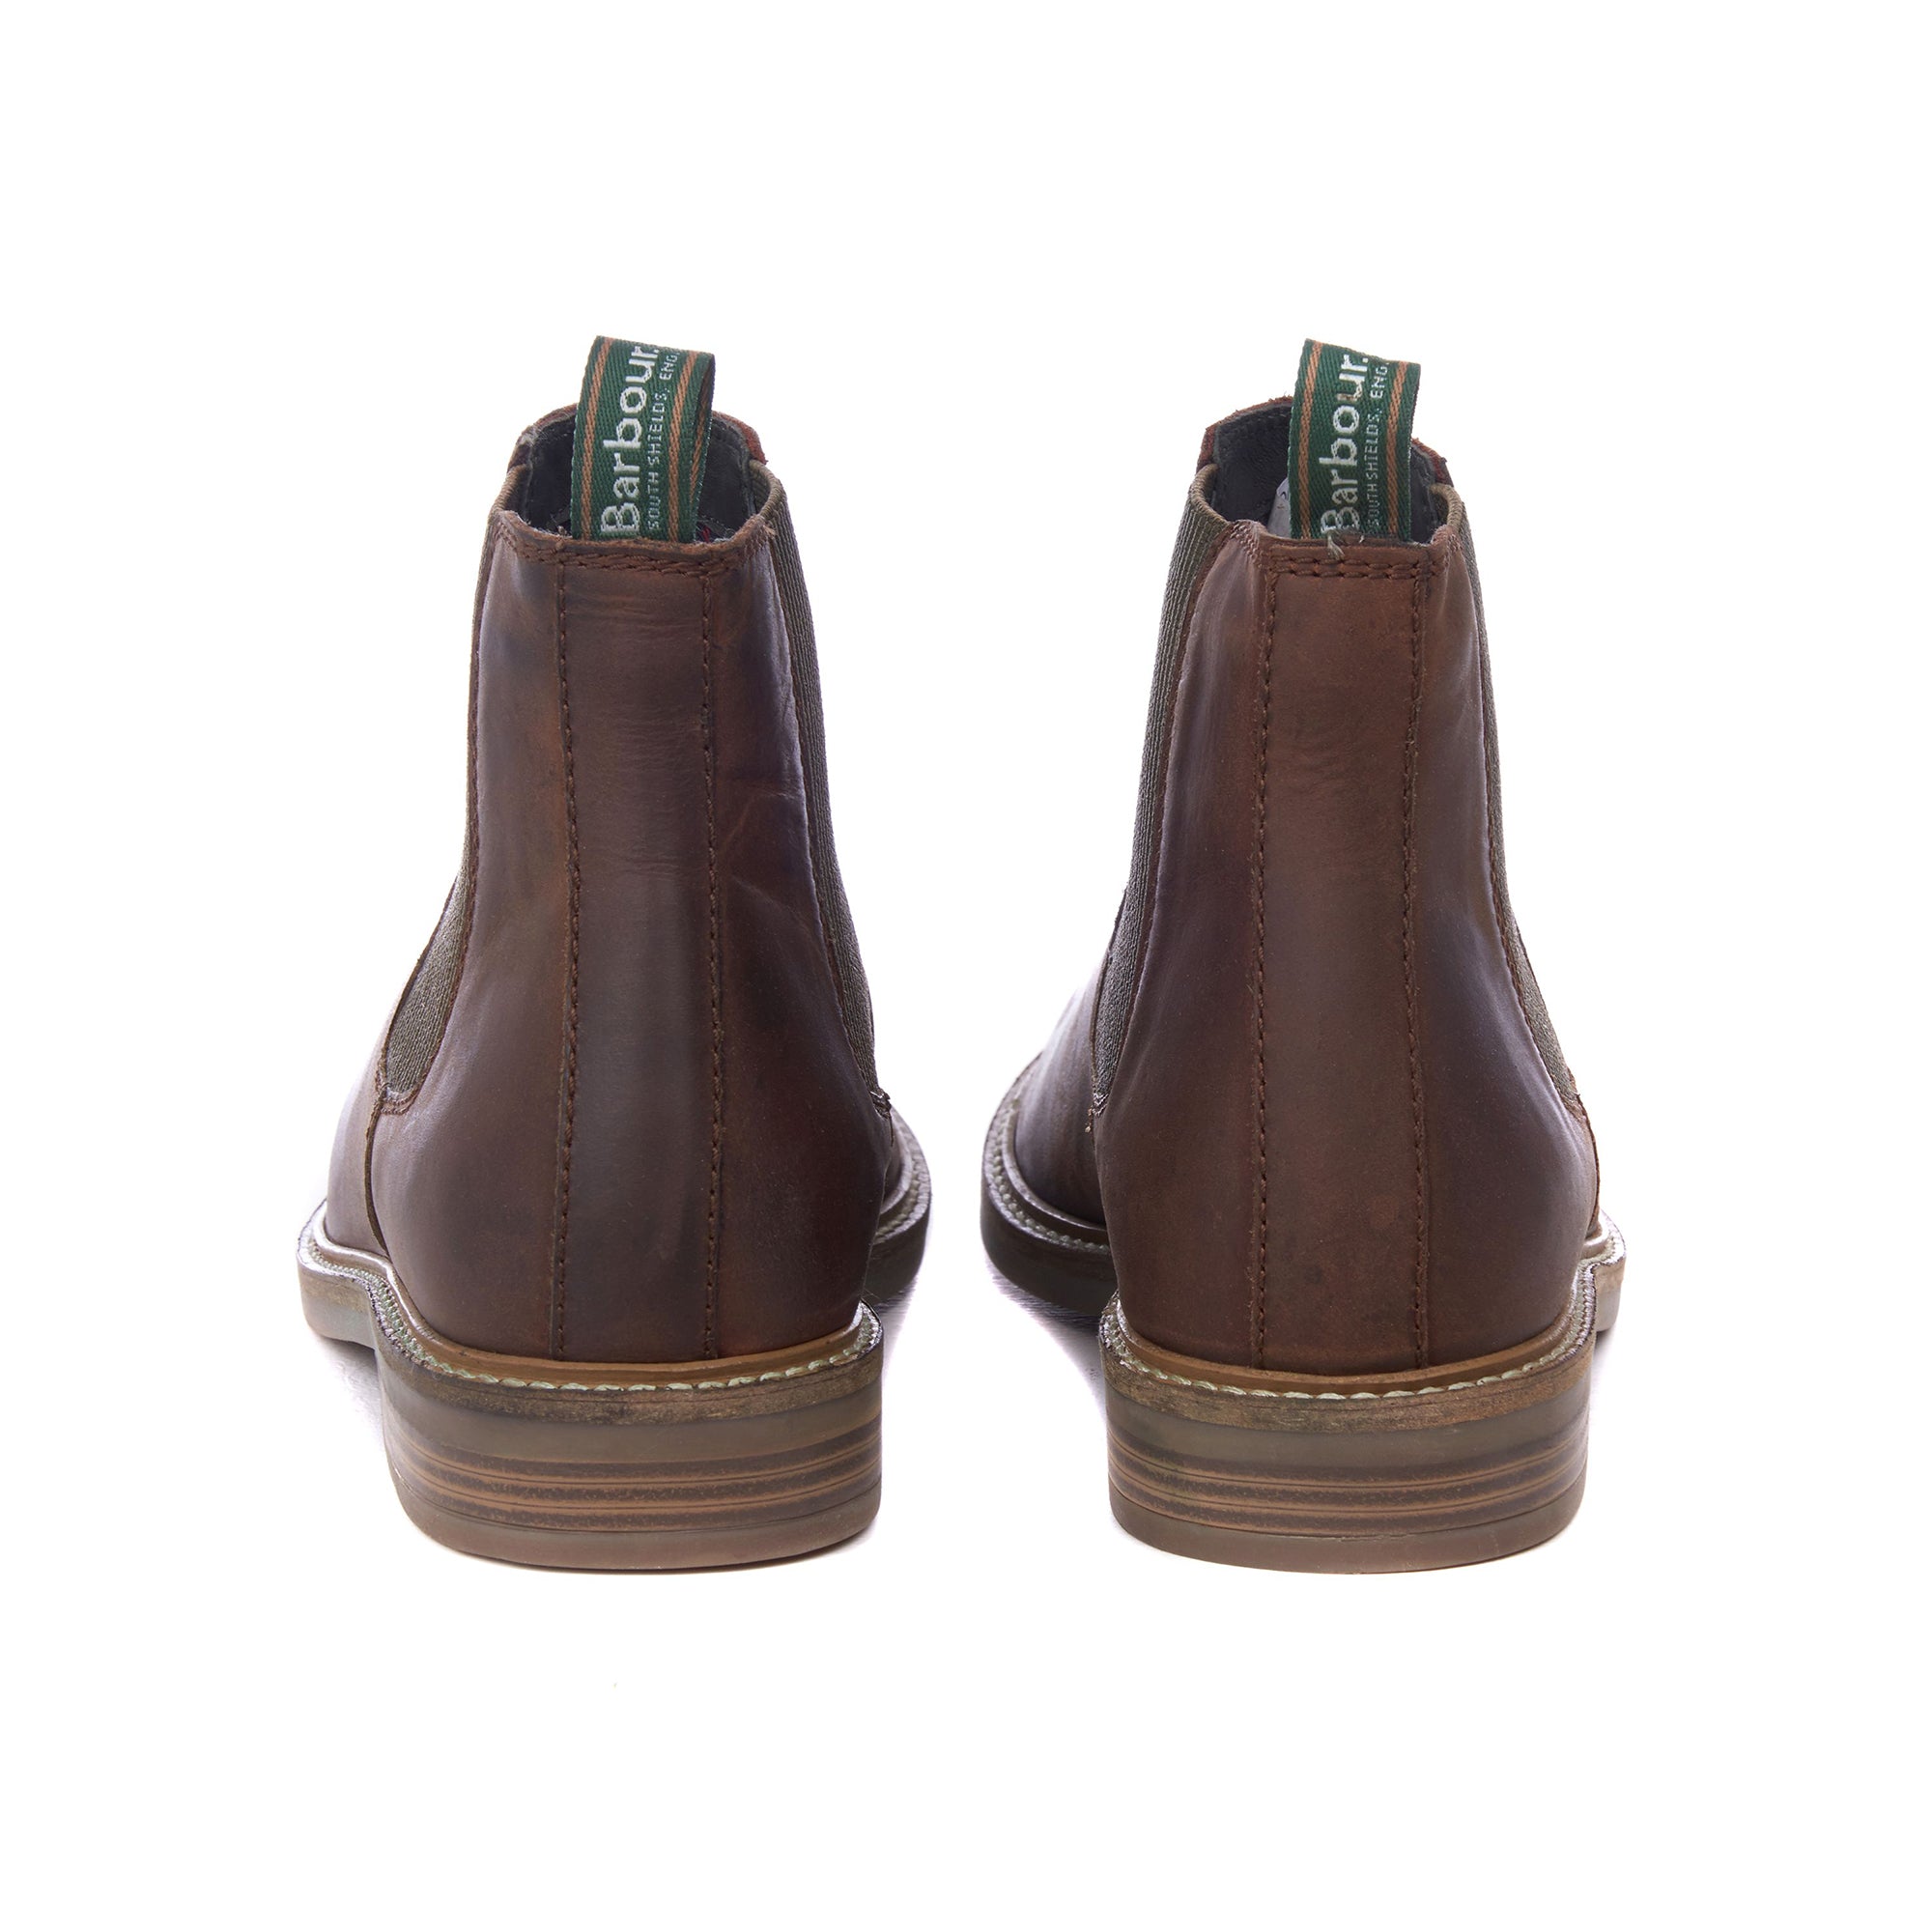 Barbour Farsley Chelsea Boot - Choco Leather